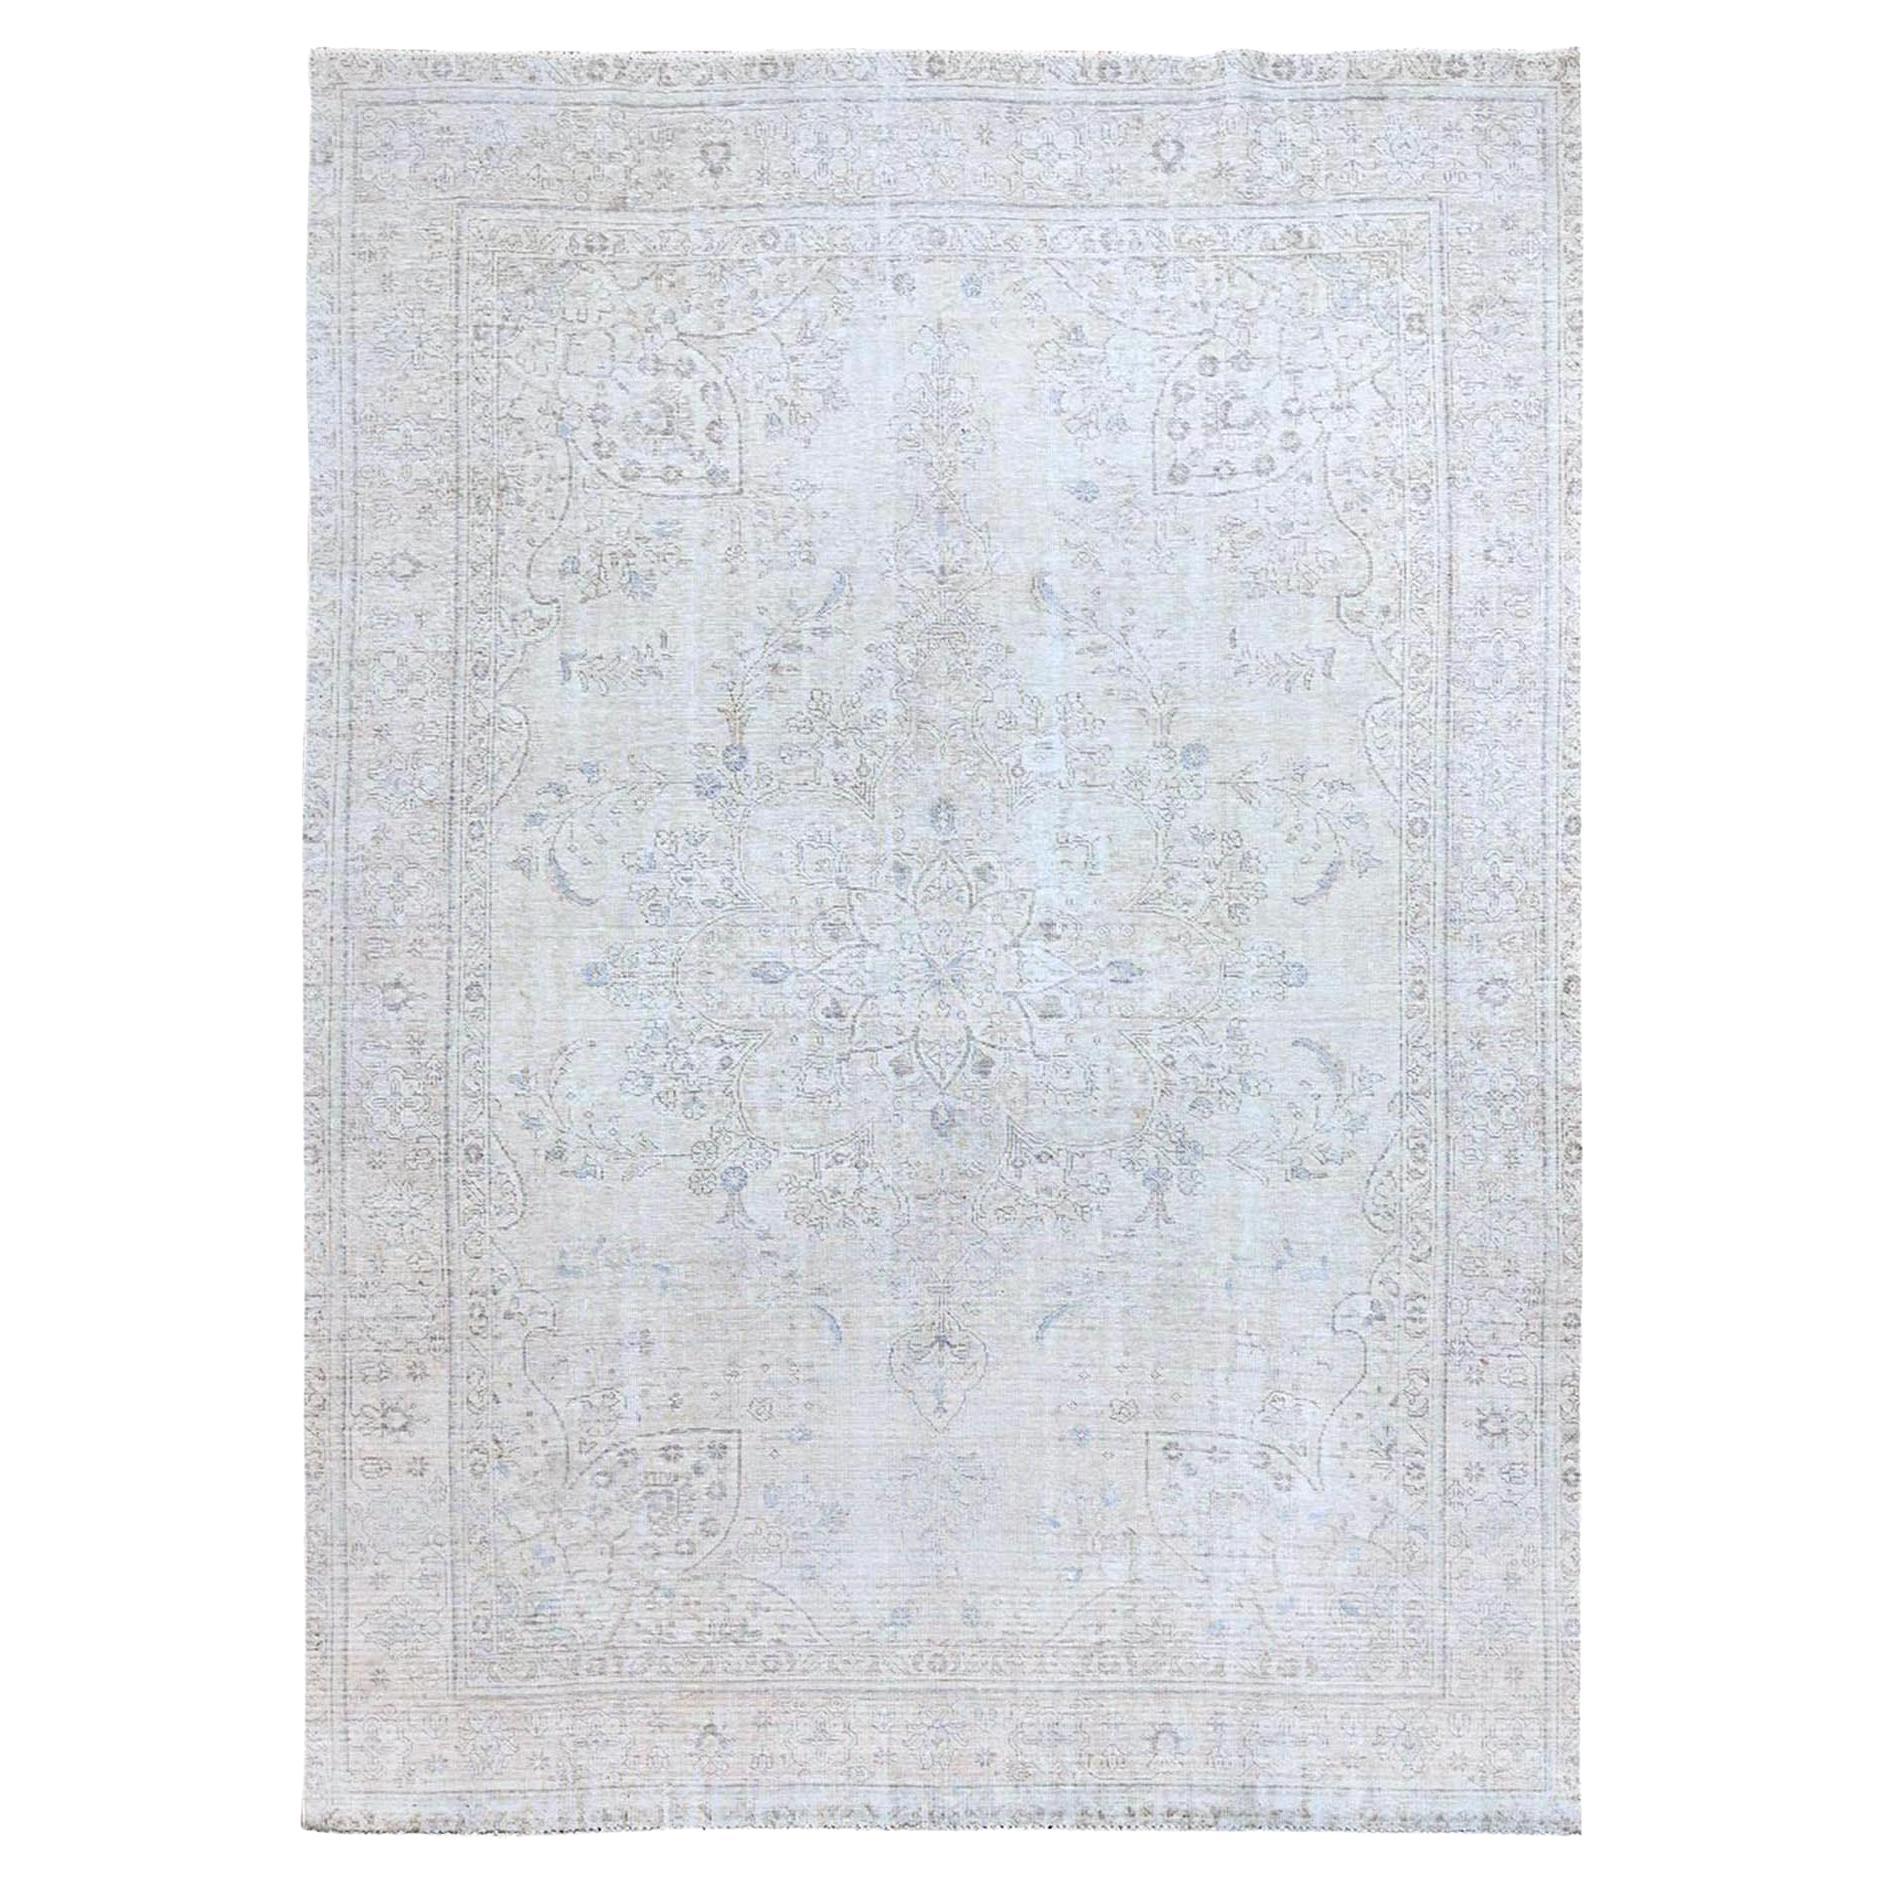 Ivory Vintage Persian Tabriz White Wash Clean Hand Knotted Wool Rustic Look Rug